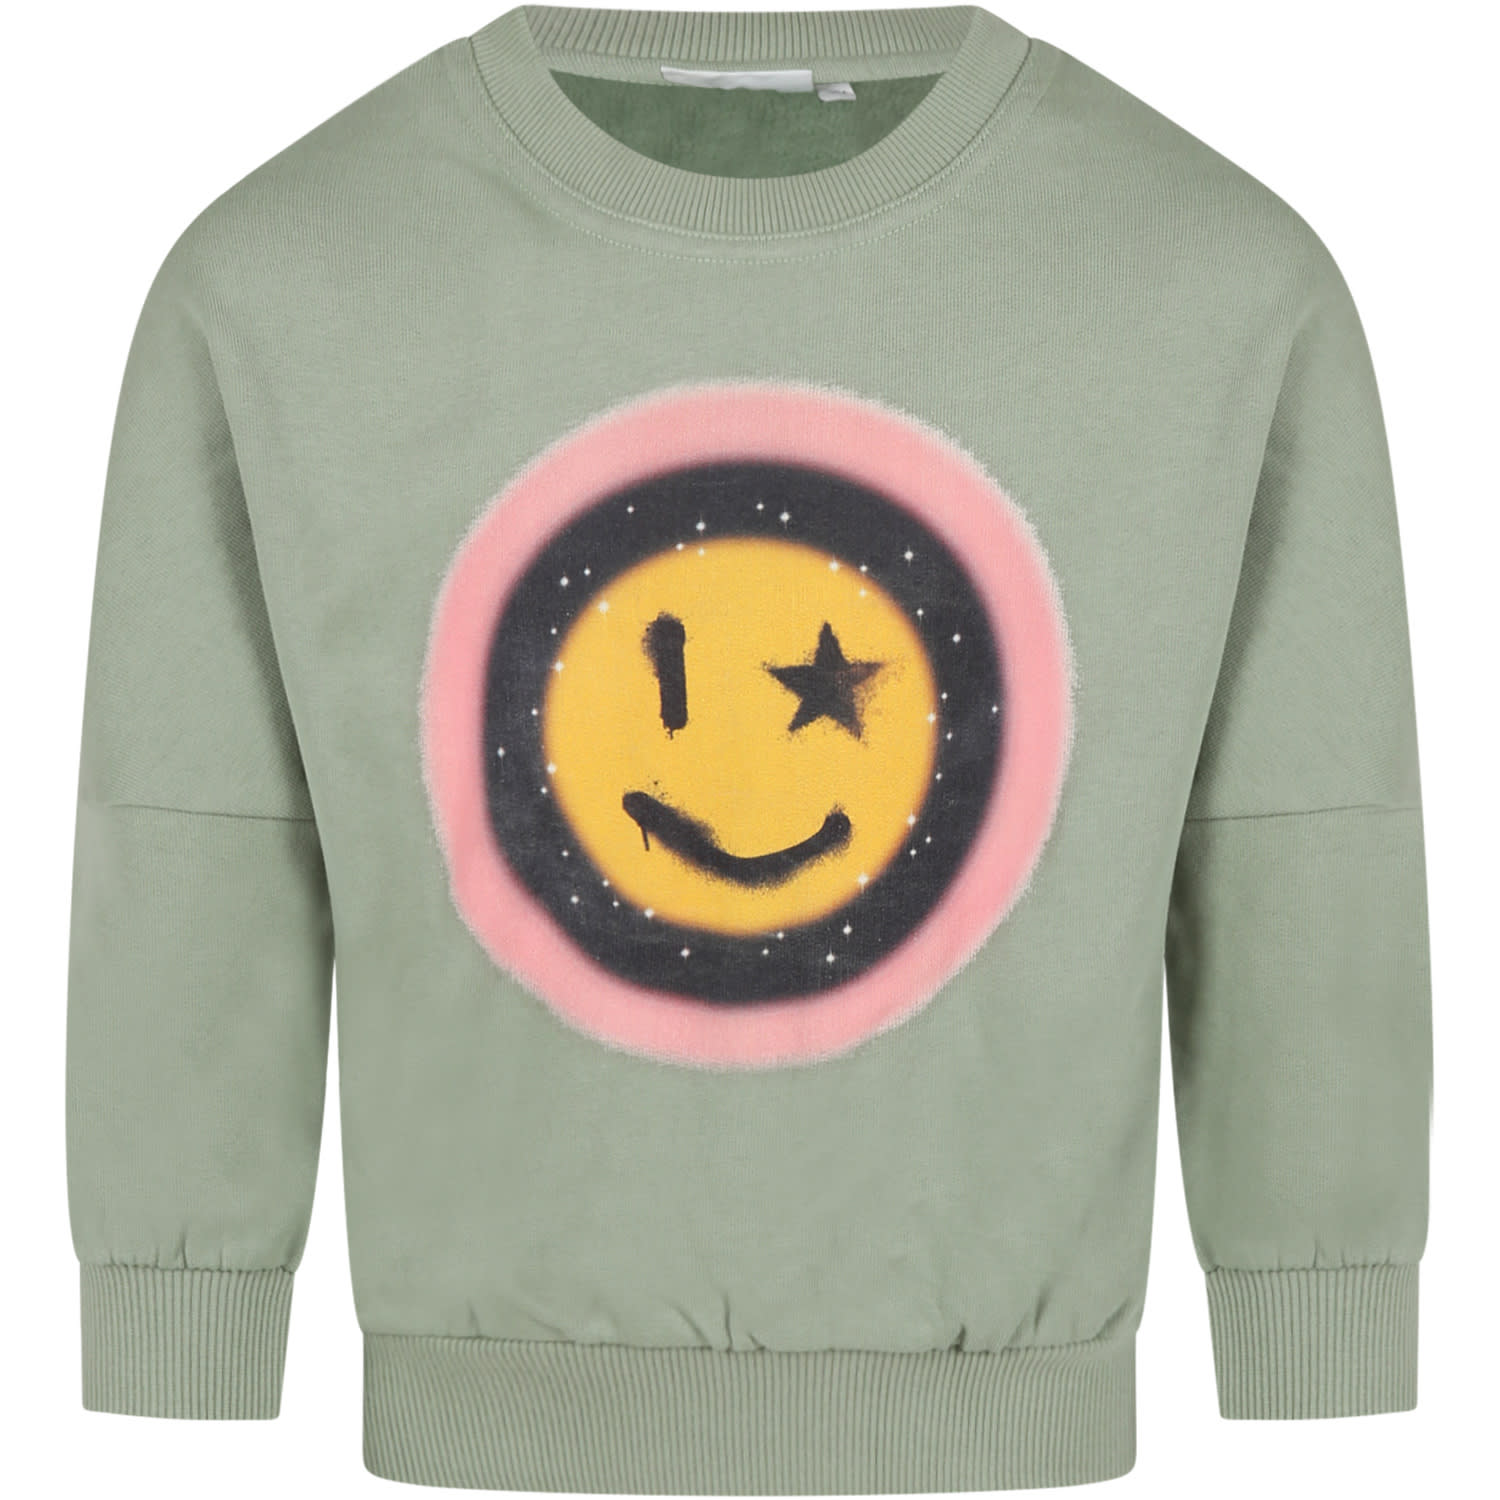 Molo Green Sweatshirt For Kids With Smile